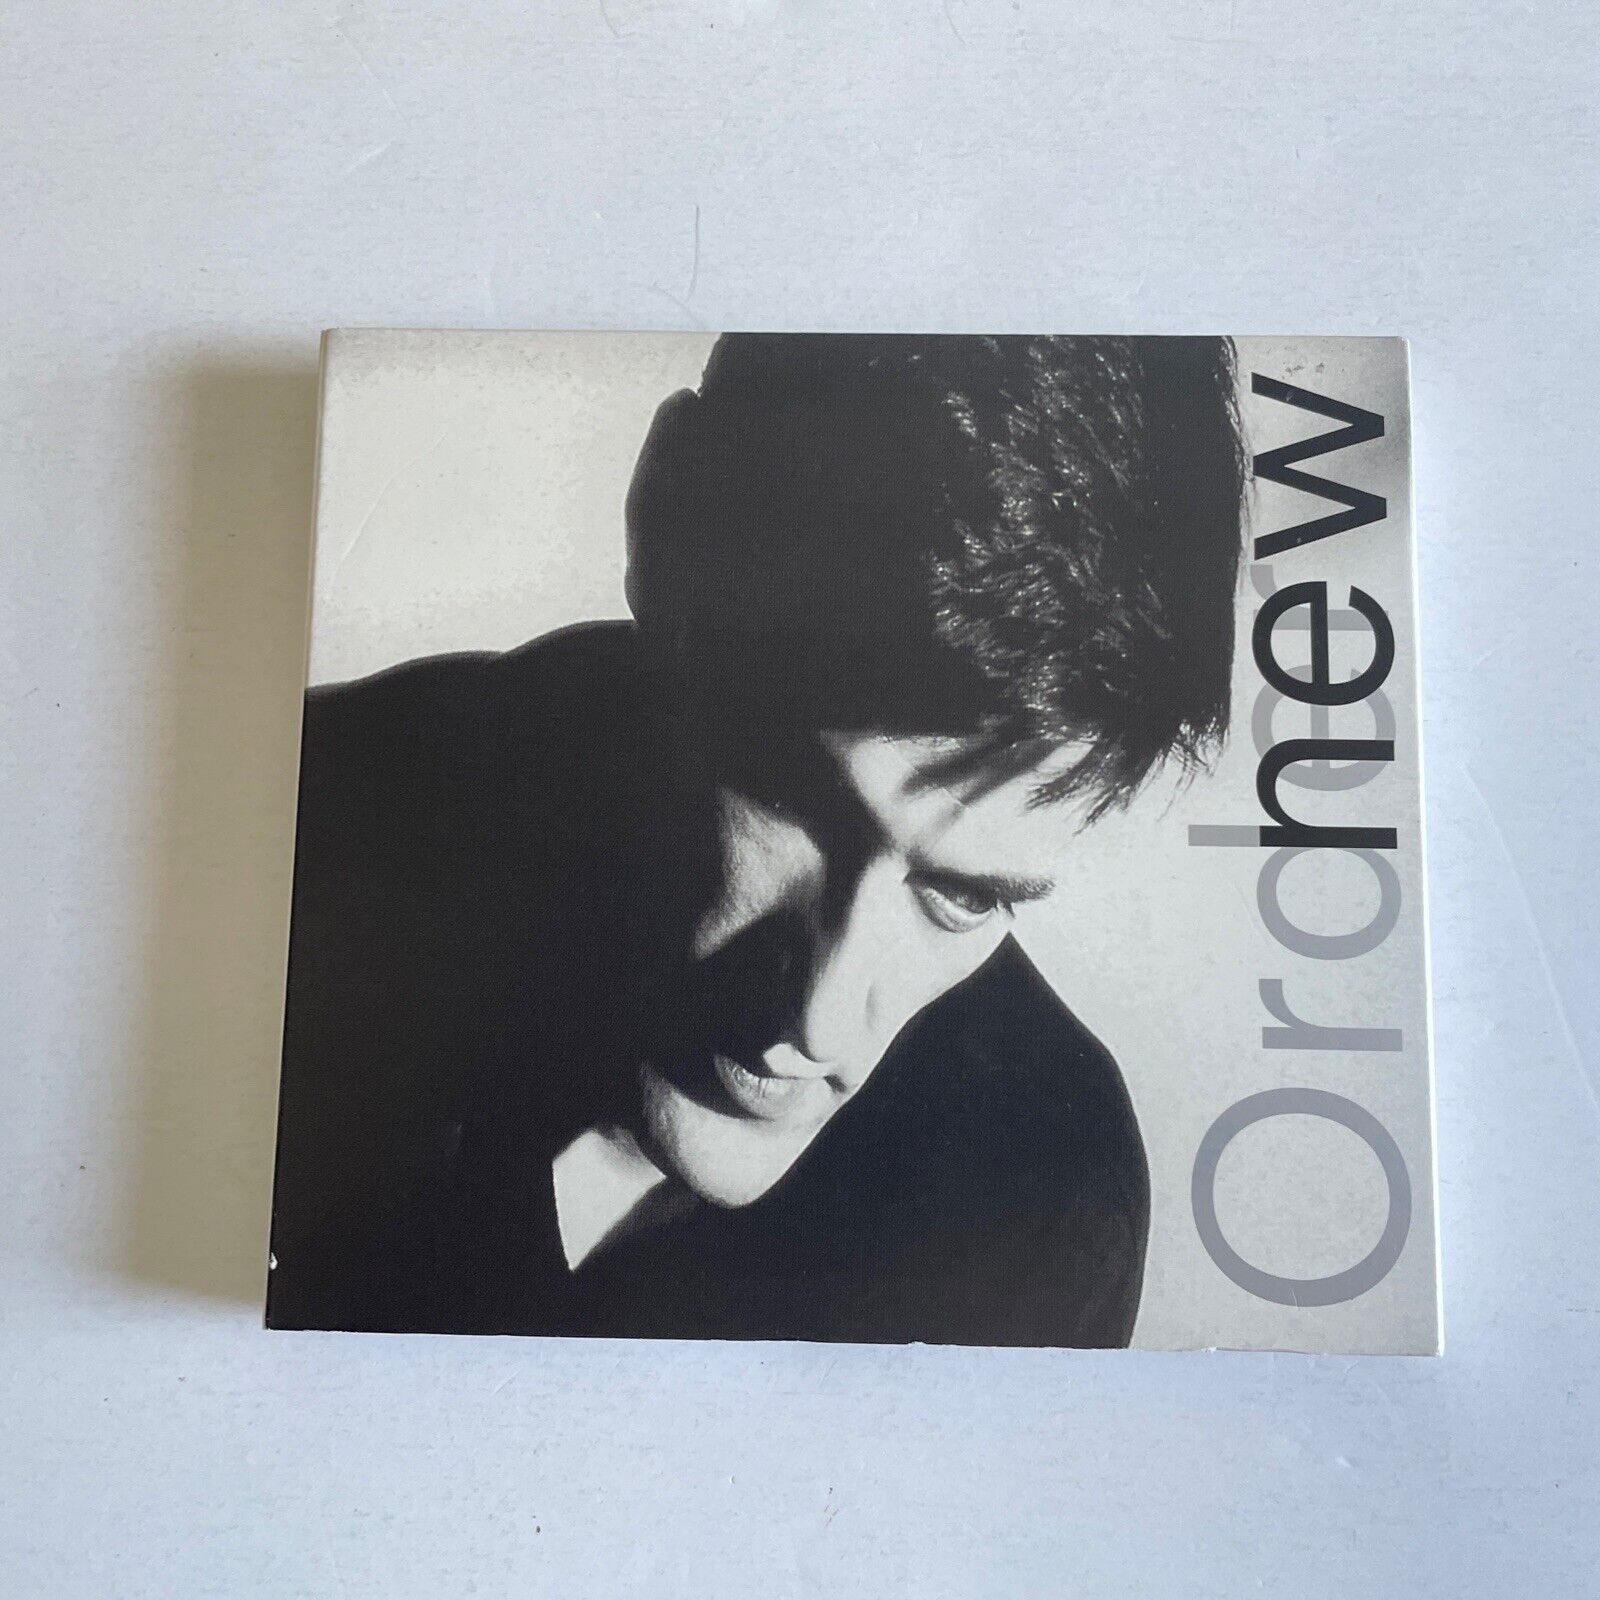 NEW ORDER Low Life - 2 CD deluxe collector's edition NM